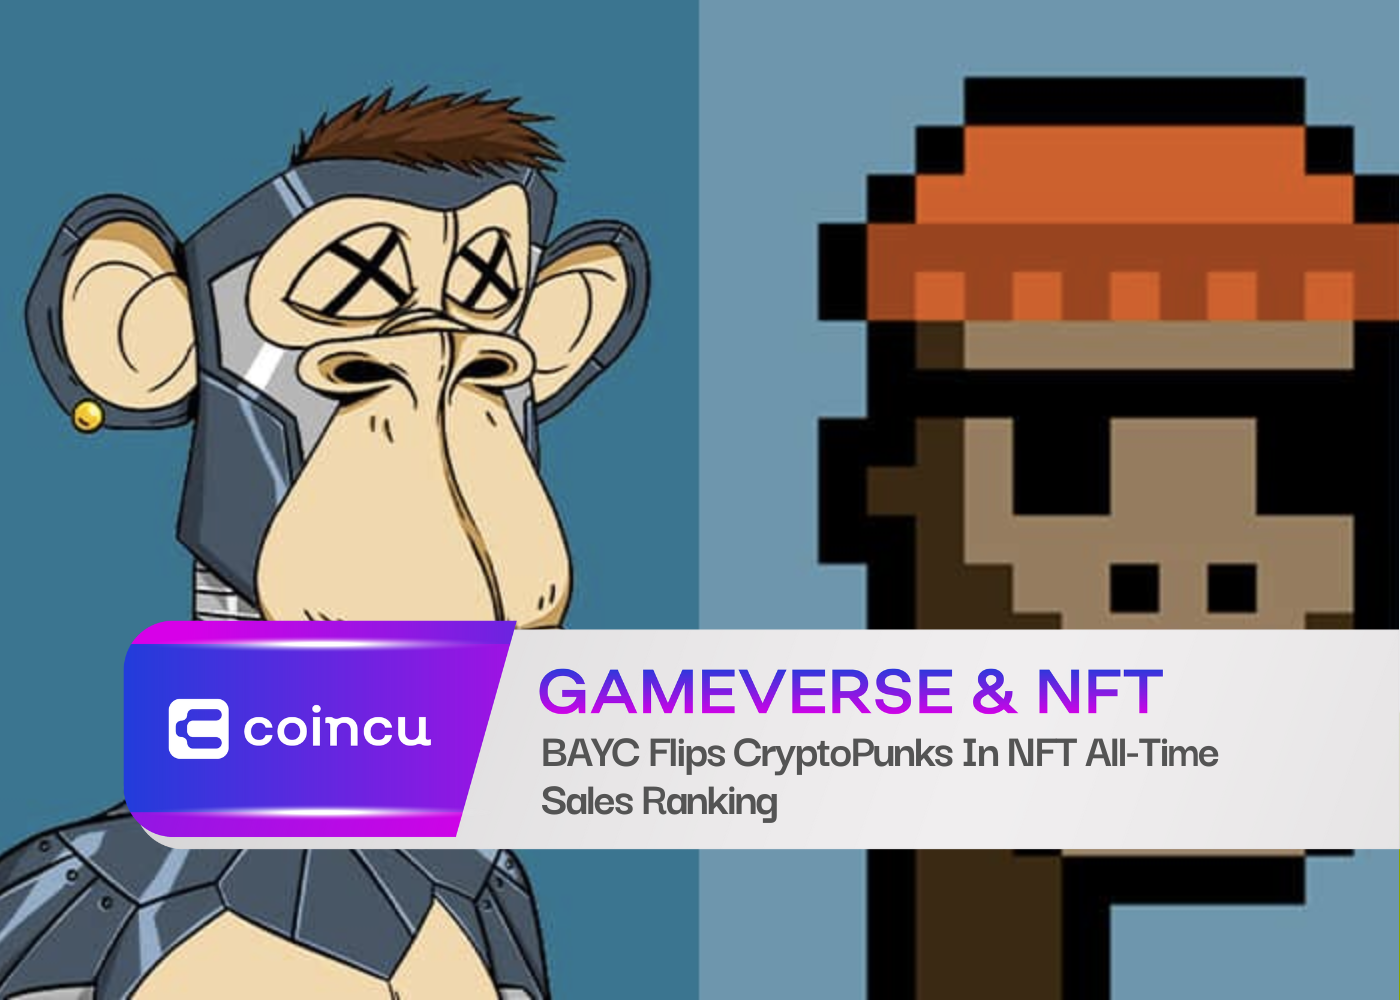 BAYC Flips CryptoPunks In NFT All-Time Sales Ranking